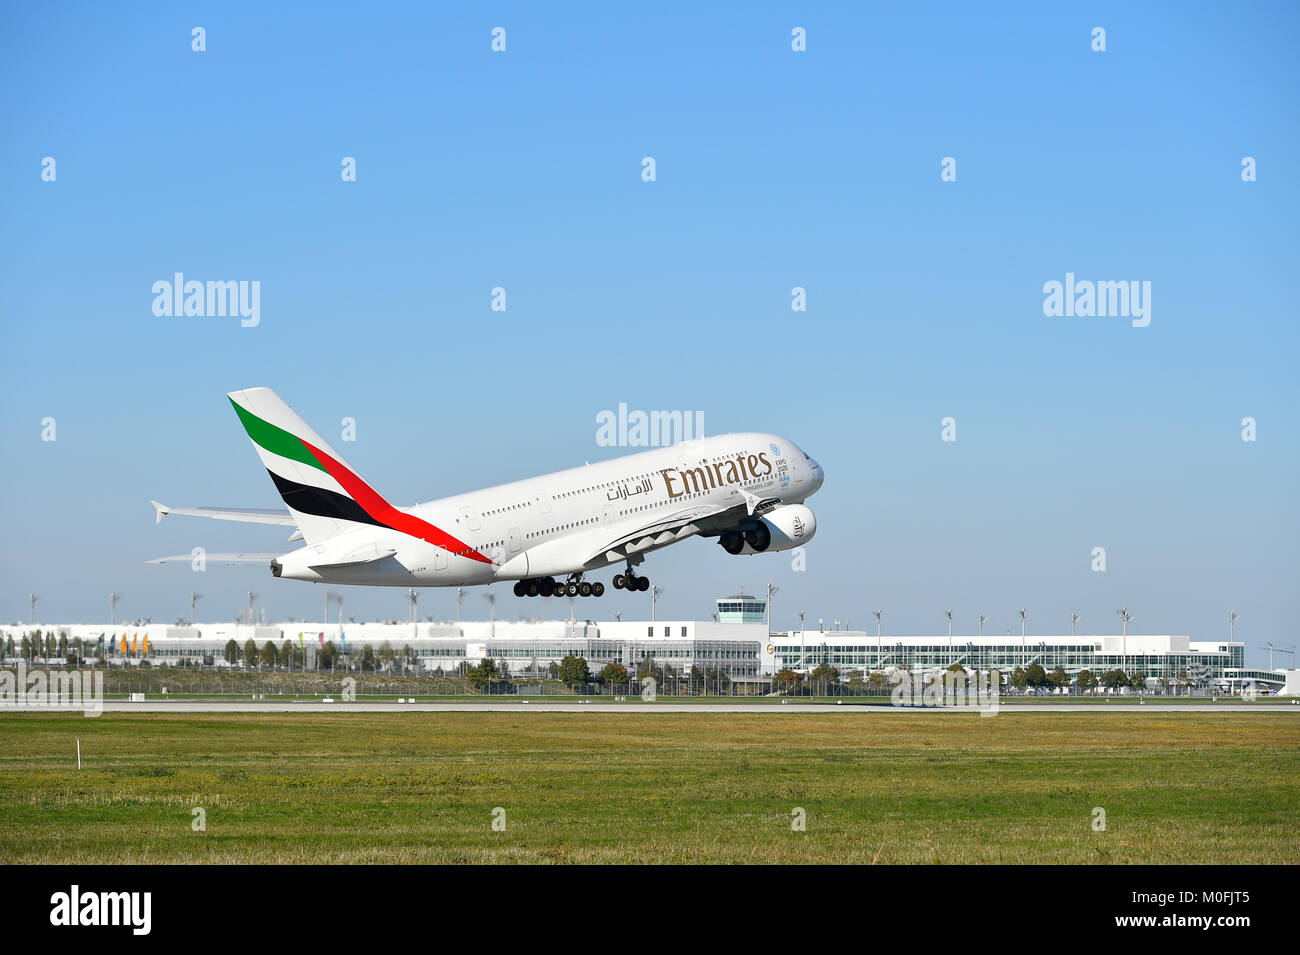 Emirates, Airbus, A380-800, A380, 800, Airplane, Aircraft, Plane, Munich Airport, take of Stock Photo